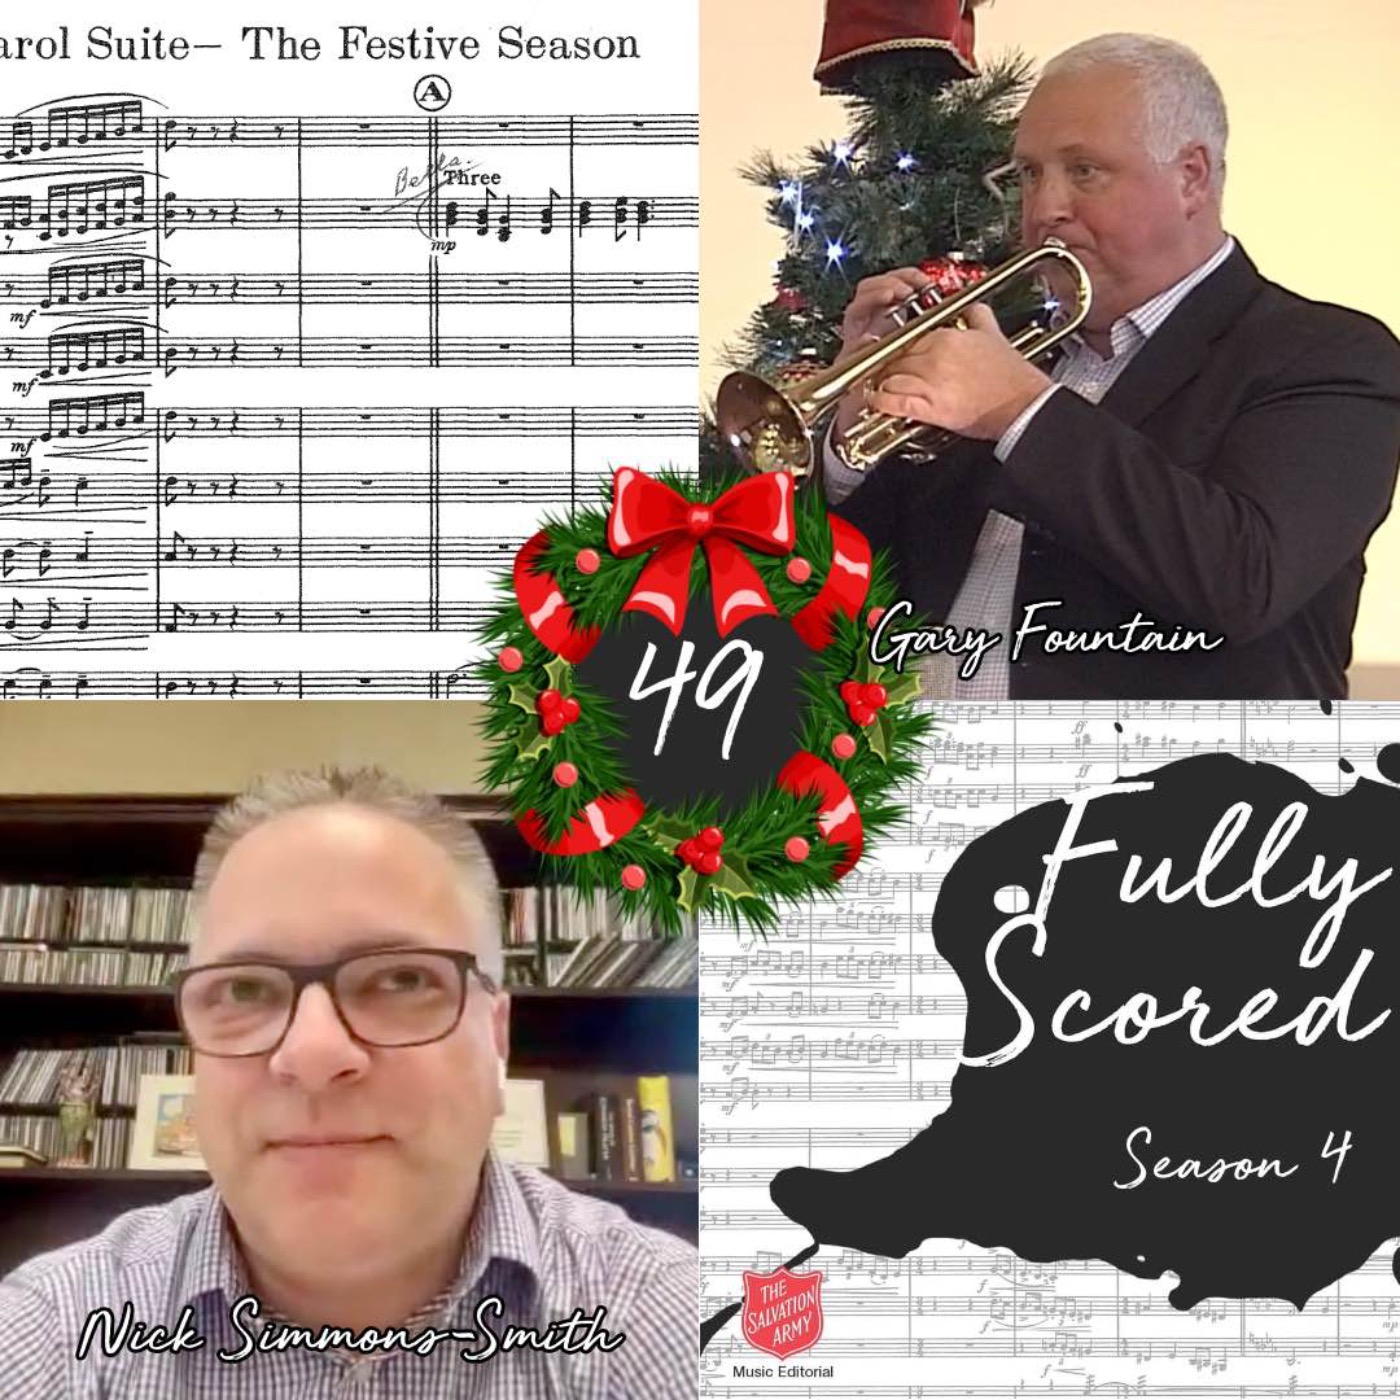 cover art for Fully Scored | Ep. 49 (Gary Fountain & Nick Simmons-Smith)